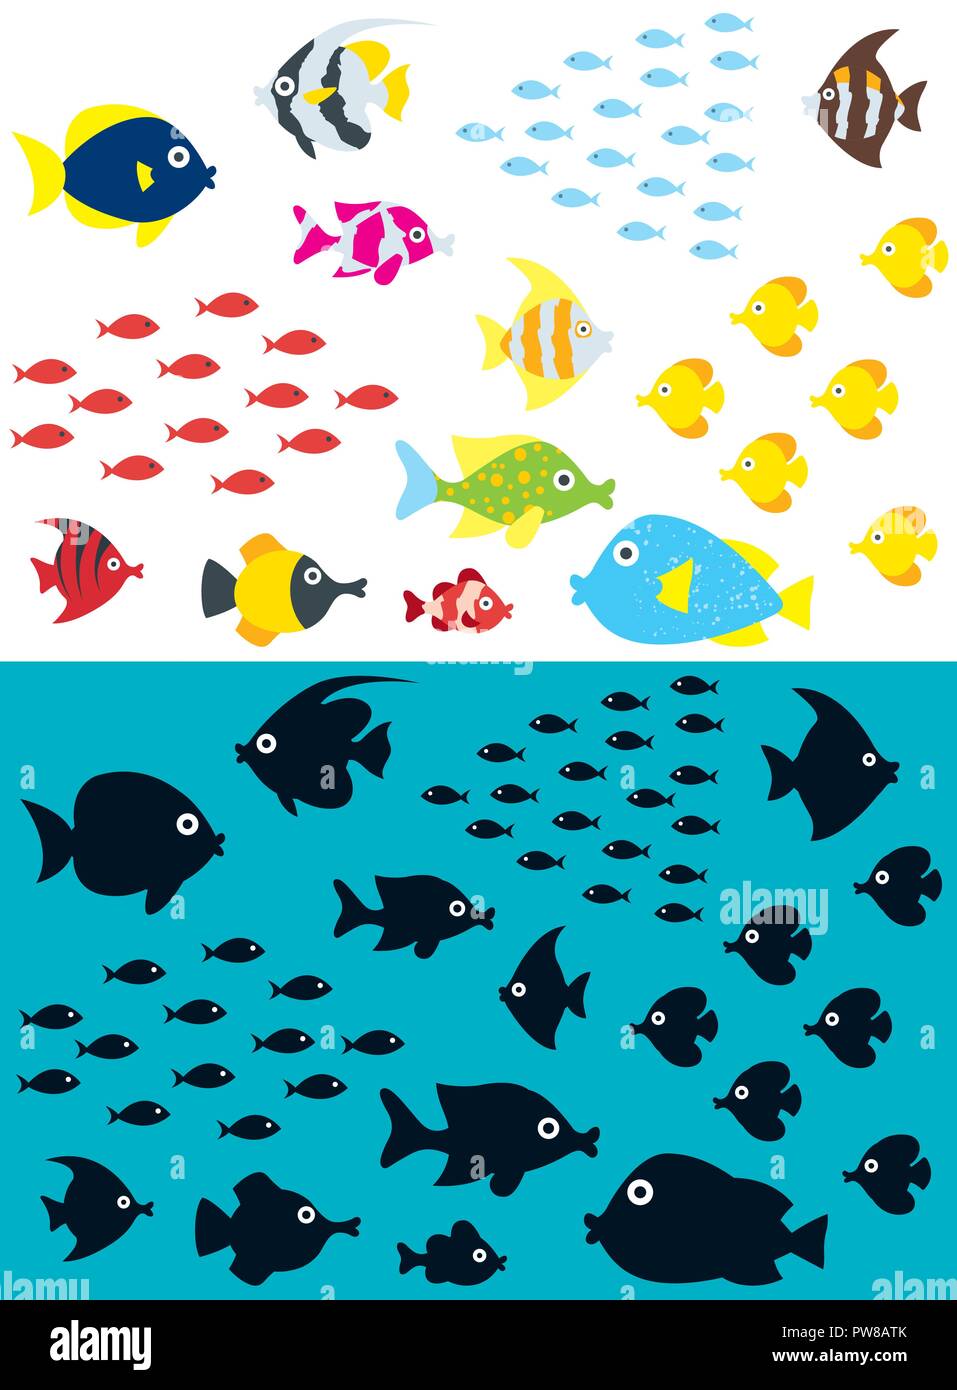 Set of cartoon fish, including silhouettes. Stock Vector